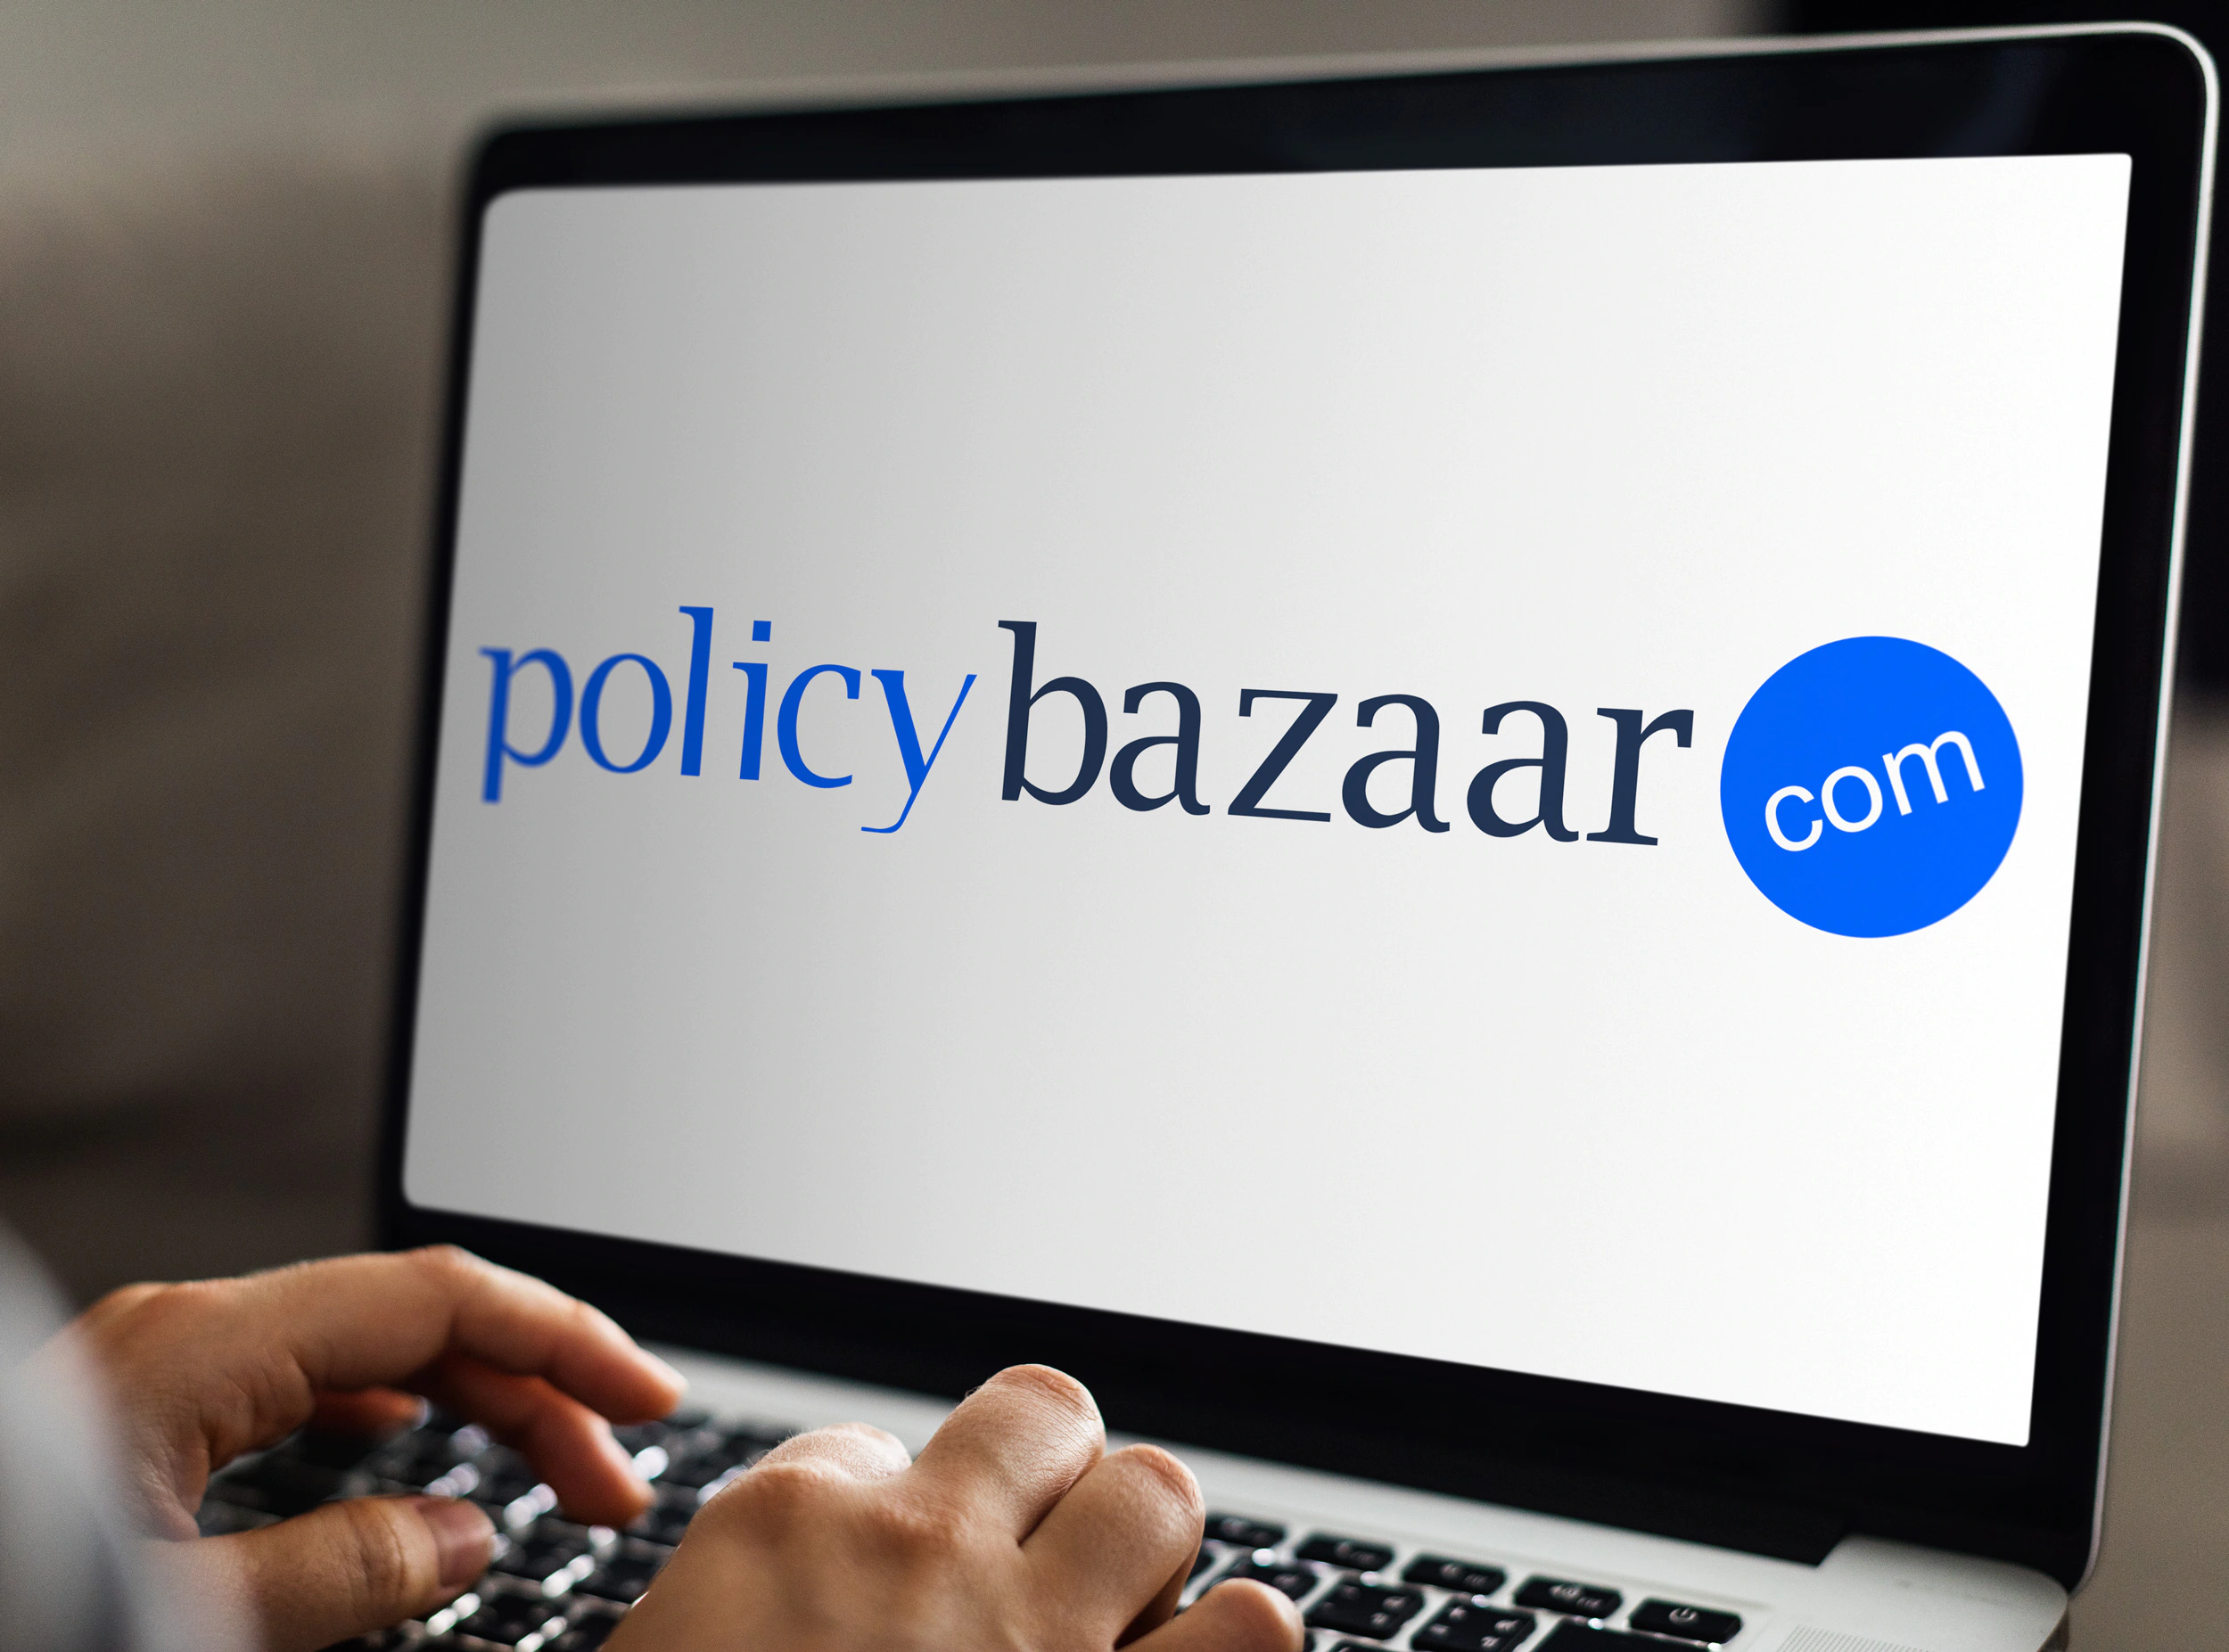 Policybazaar Says Its IT System Hacked; Authorities Informed